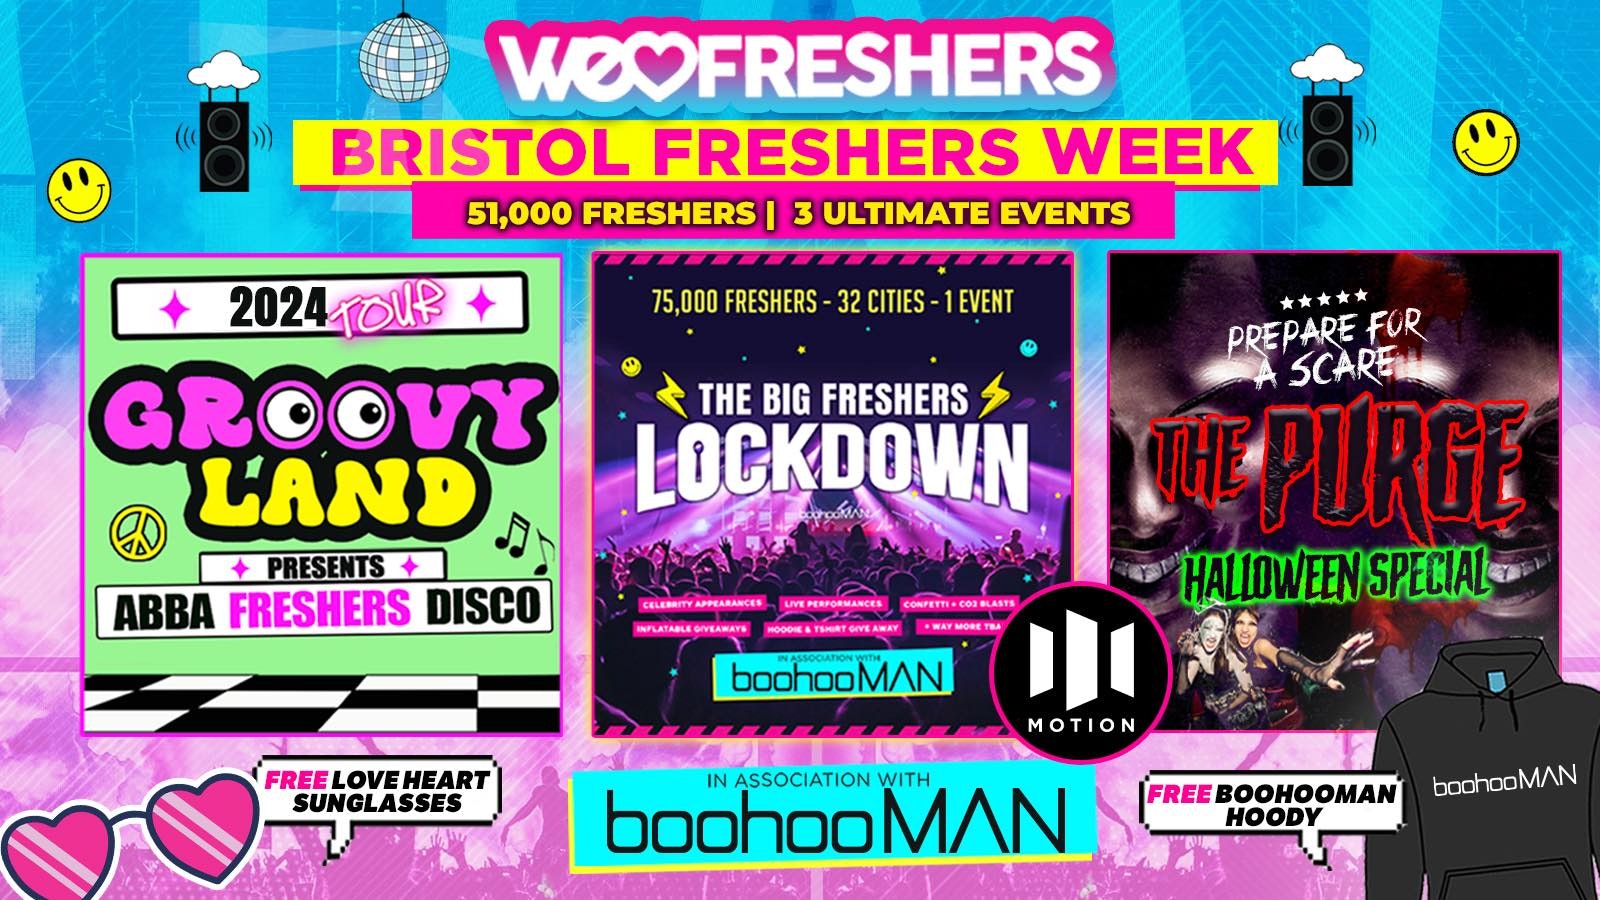 WE LOVE BRISTOL FRESHERS 2024 in association with boohooMAN – 3 EVENTS❗